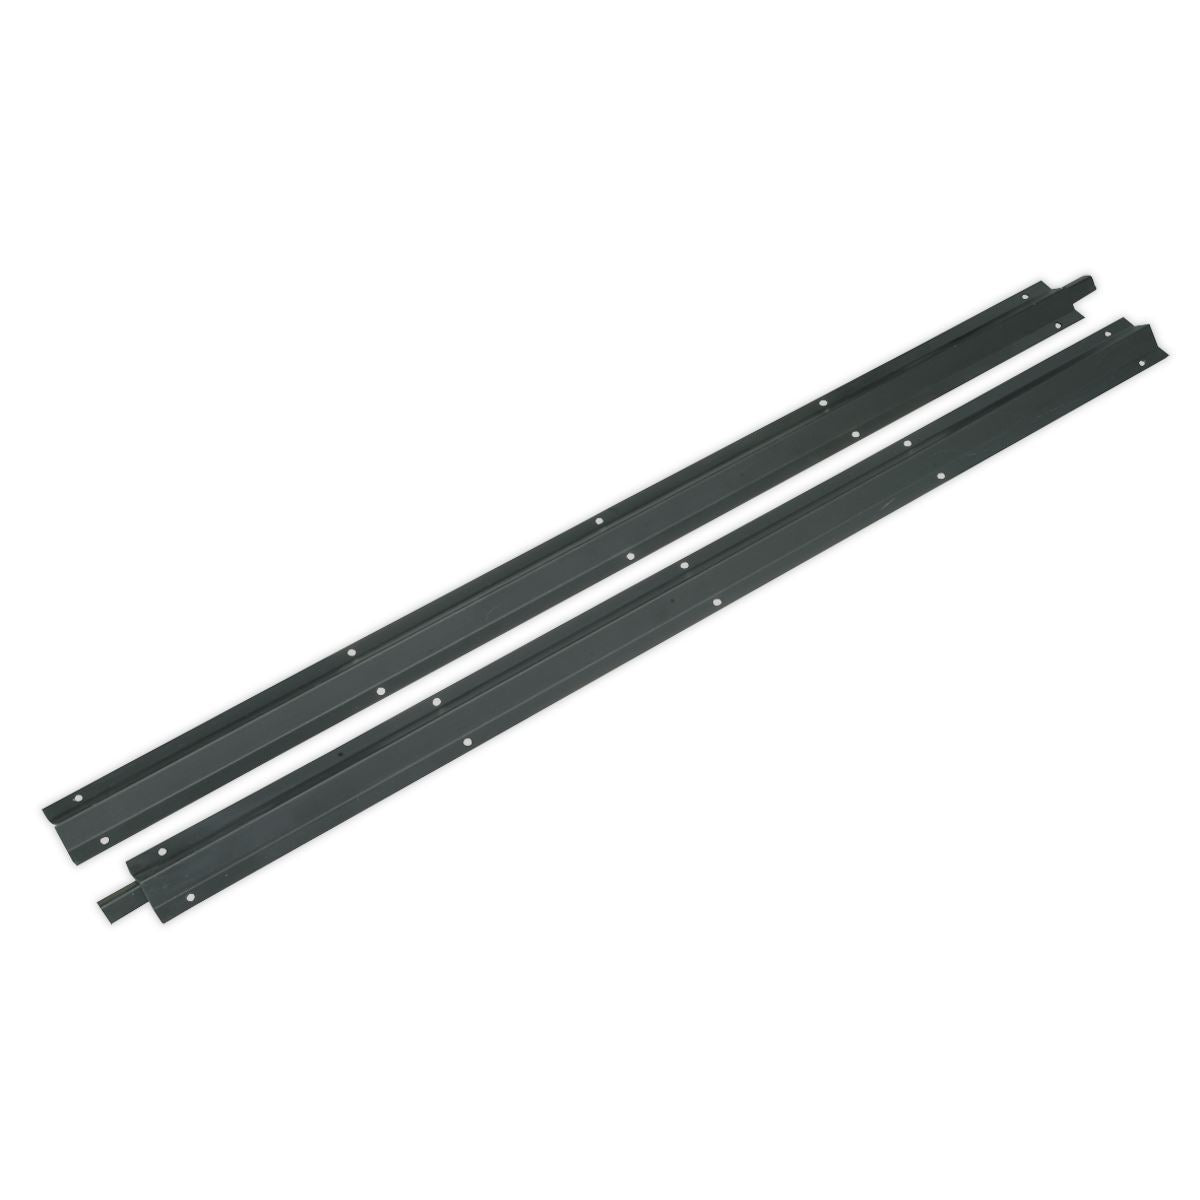 Sealey Extension Rail Set for HBS97 Series 1520mm